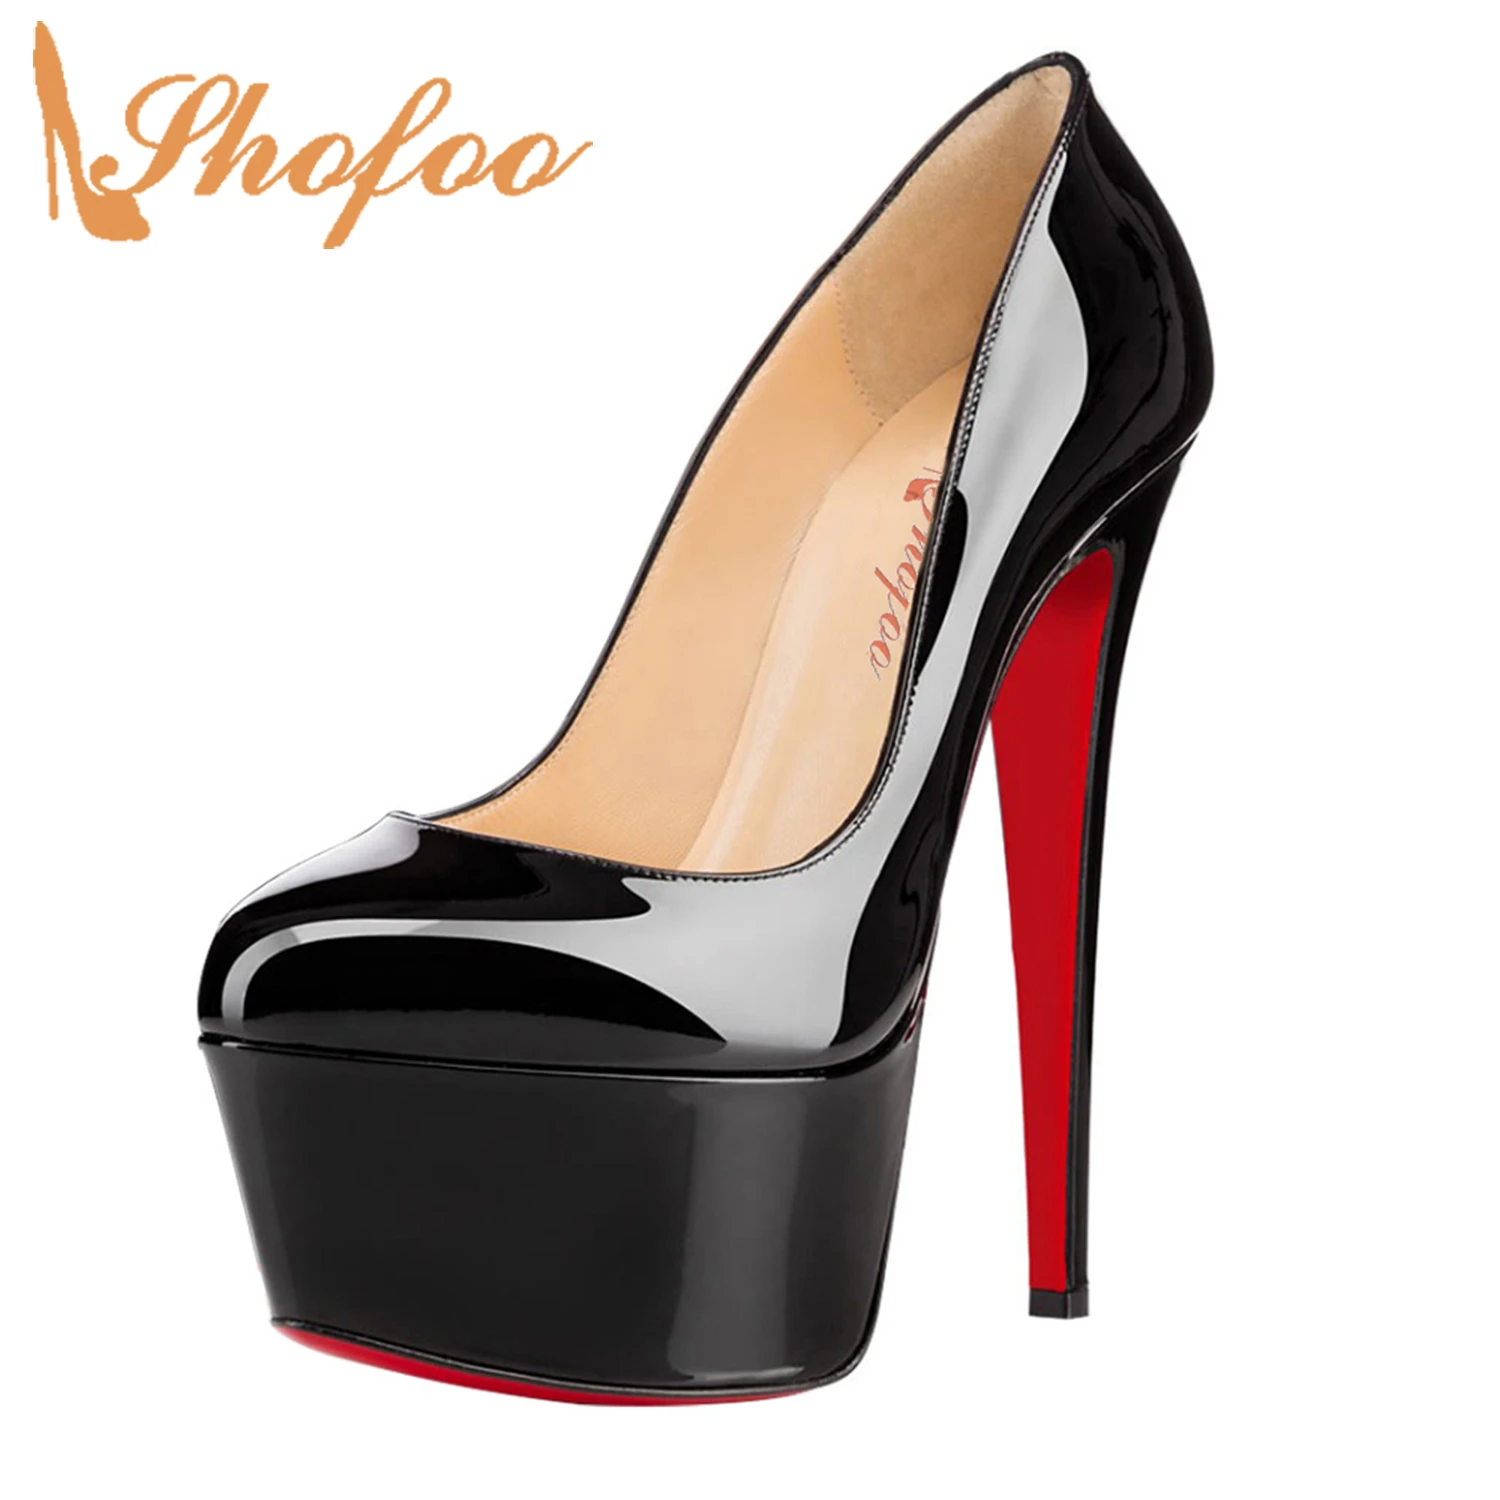 G Aktiver initial Black Red Sole Women Round Toe High Heels Platform Stiletto Slip On Pumps  Lady Wedding Party Sexy Classic Shoes Large Size 15 16 - Pumps - AliExpress